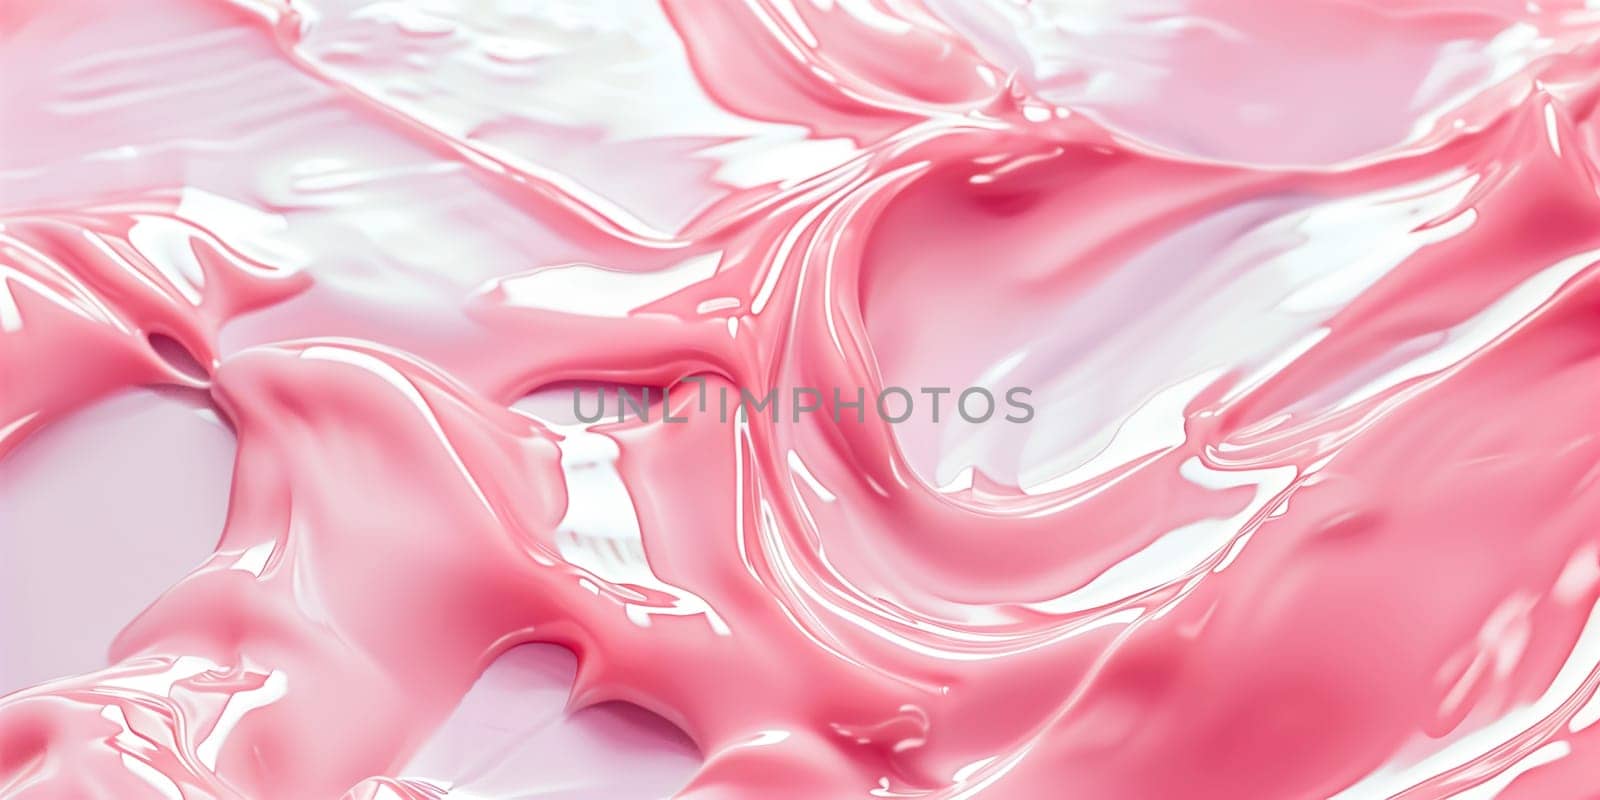 Beauty serum gel texture. Pink clear skincare cream with bubbles background. by sarymsakov